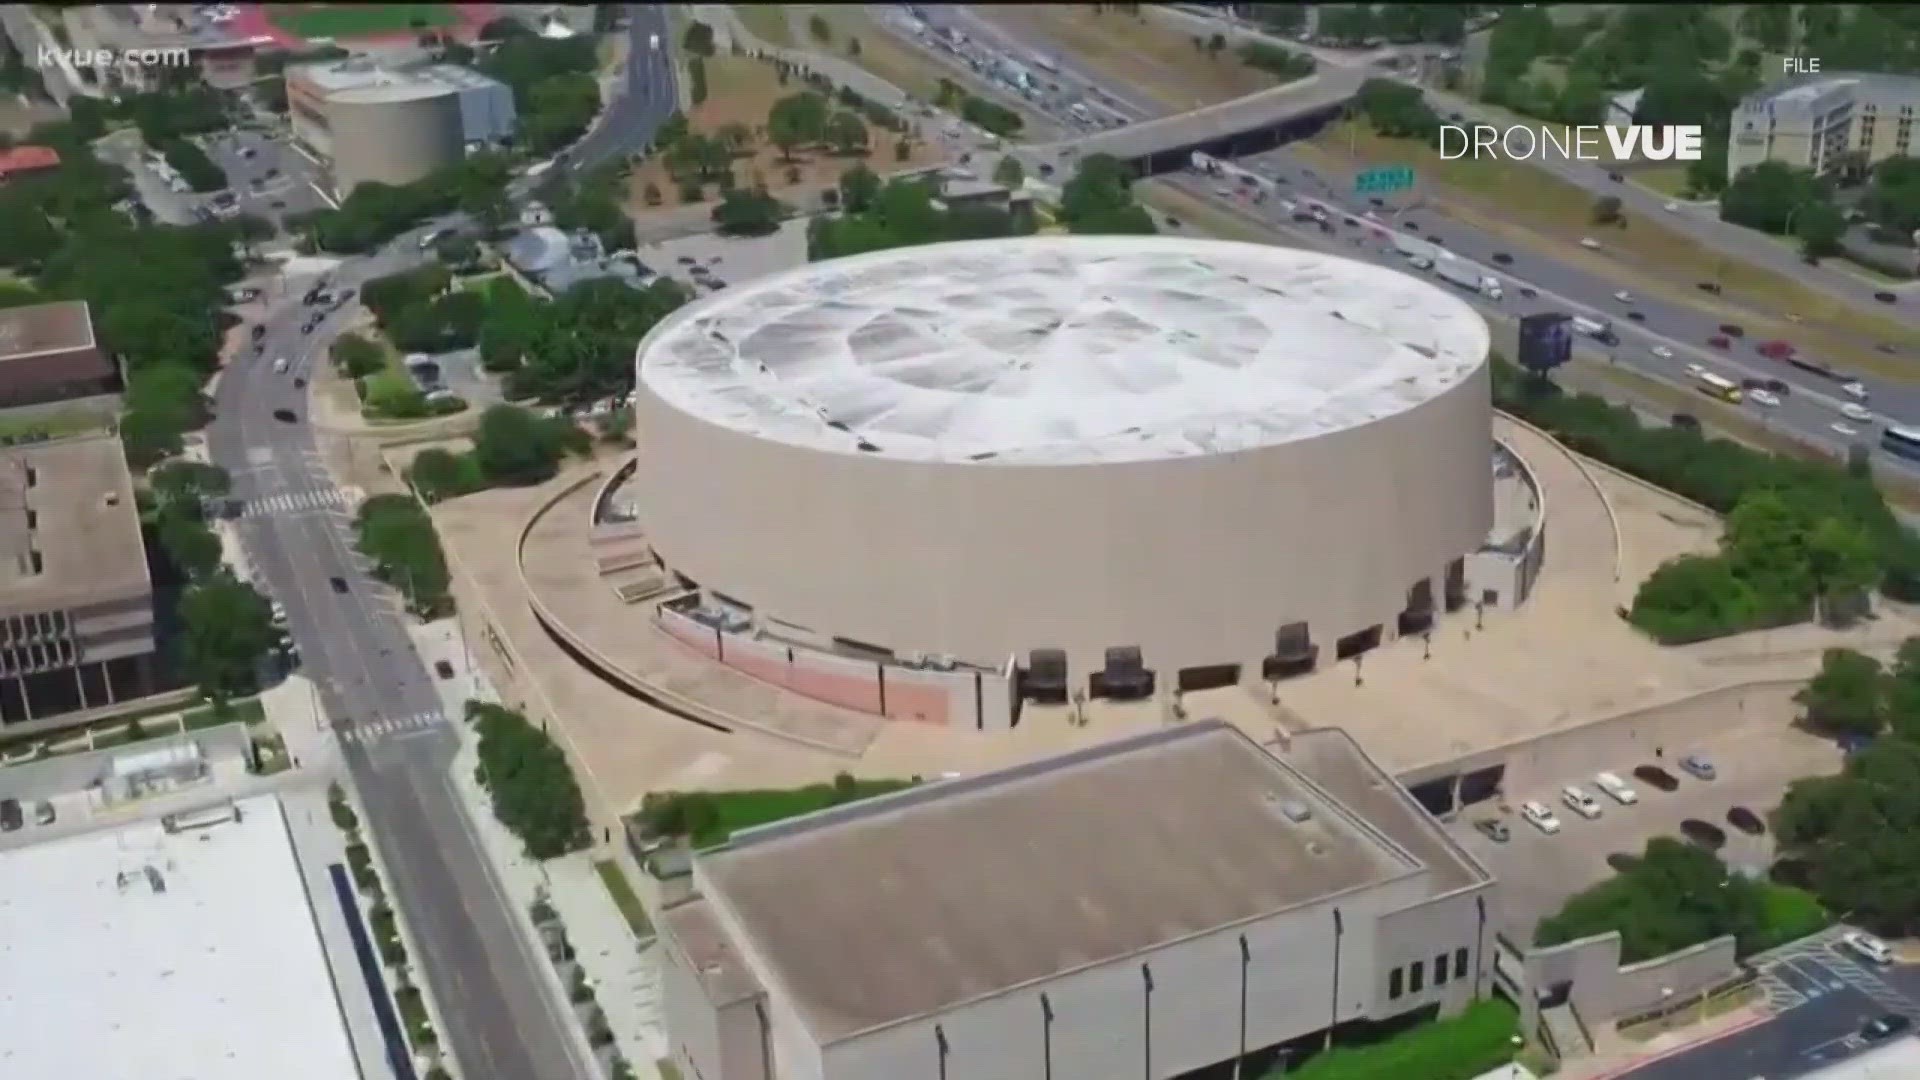 Demolishing "The Drum" is going to cost the University of Texas System a lot of money.